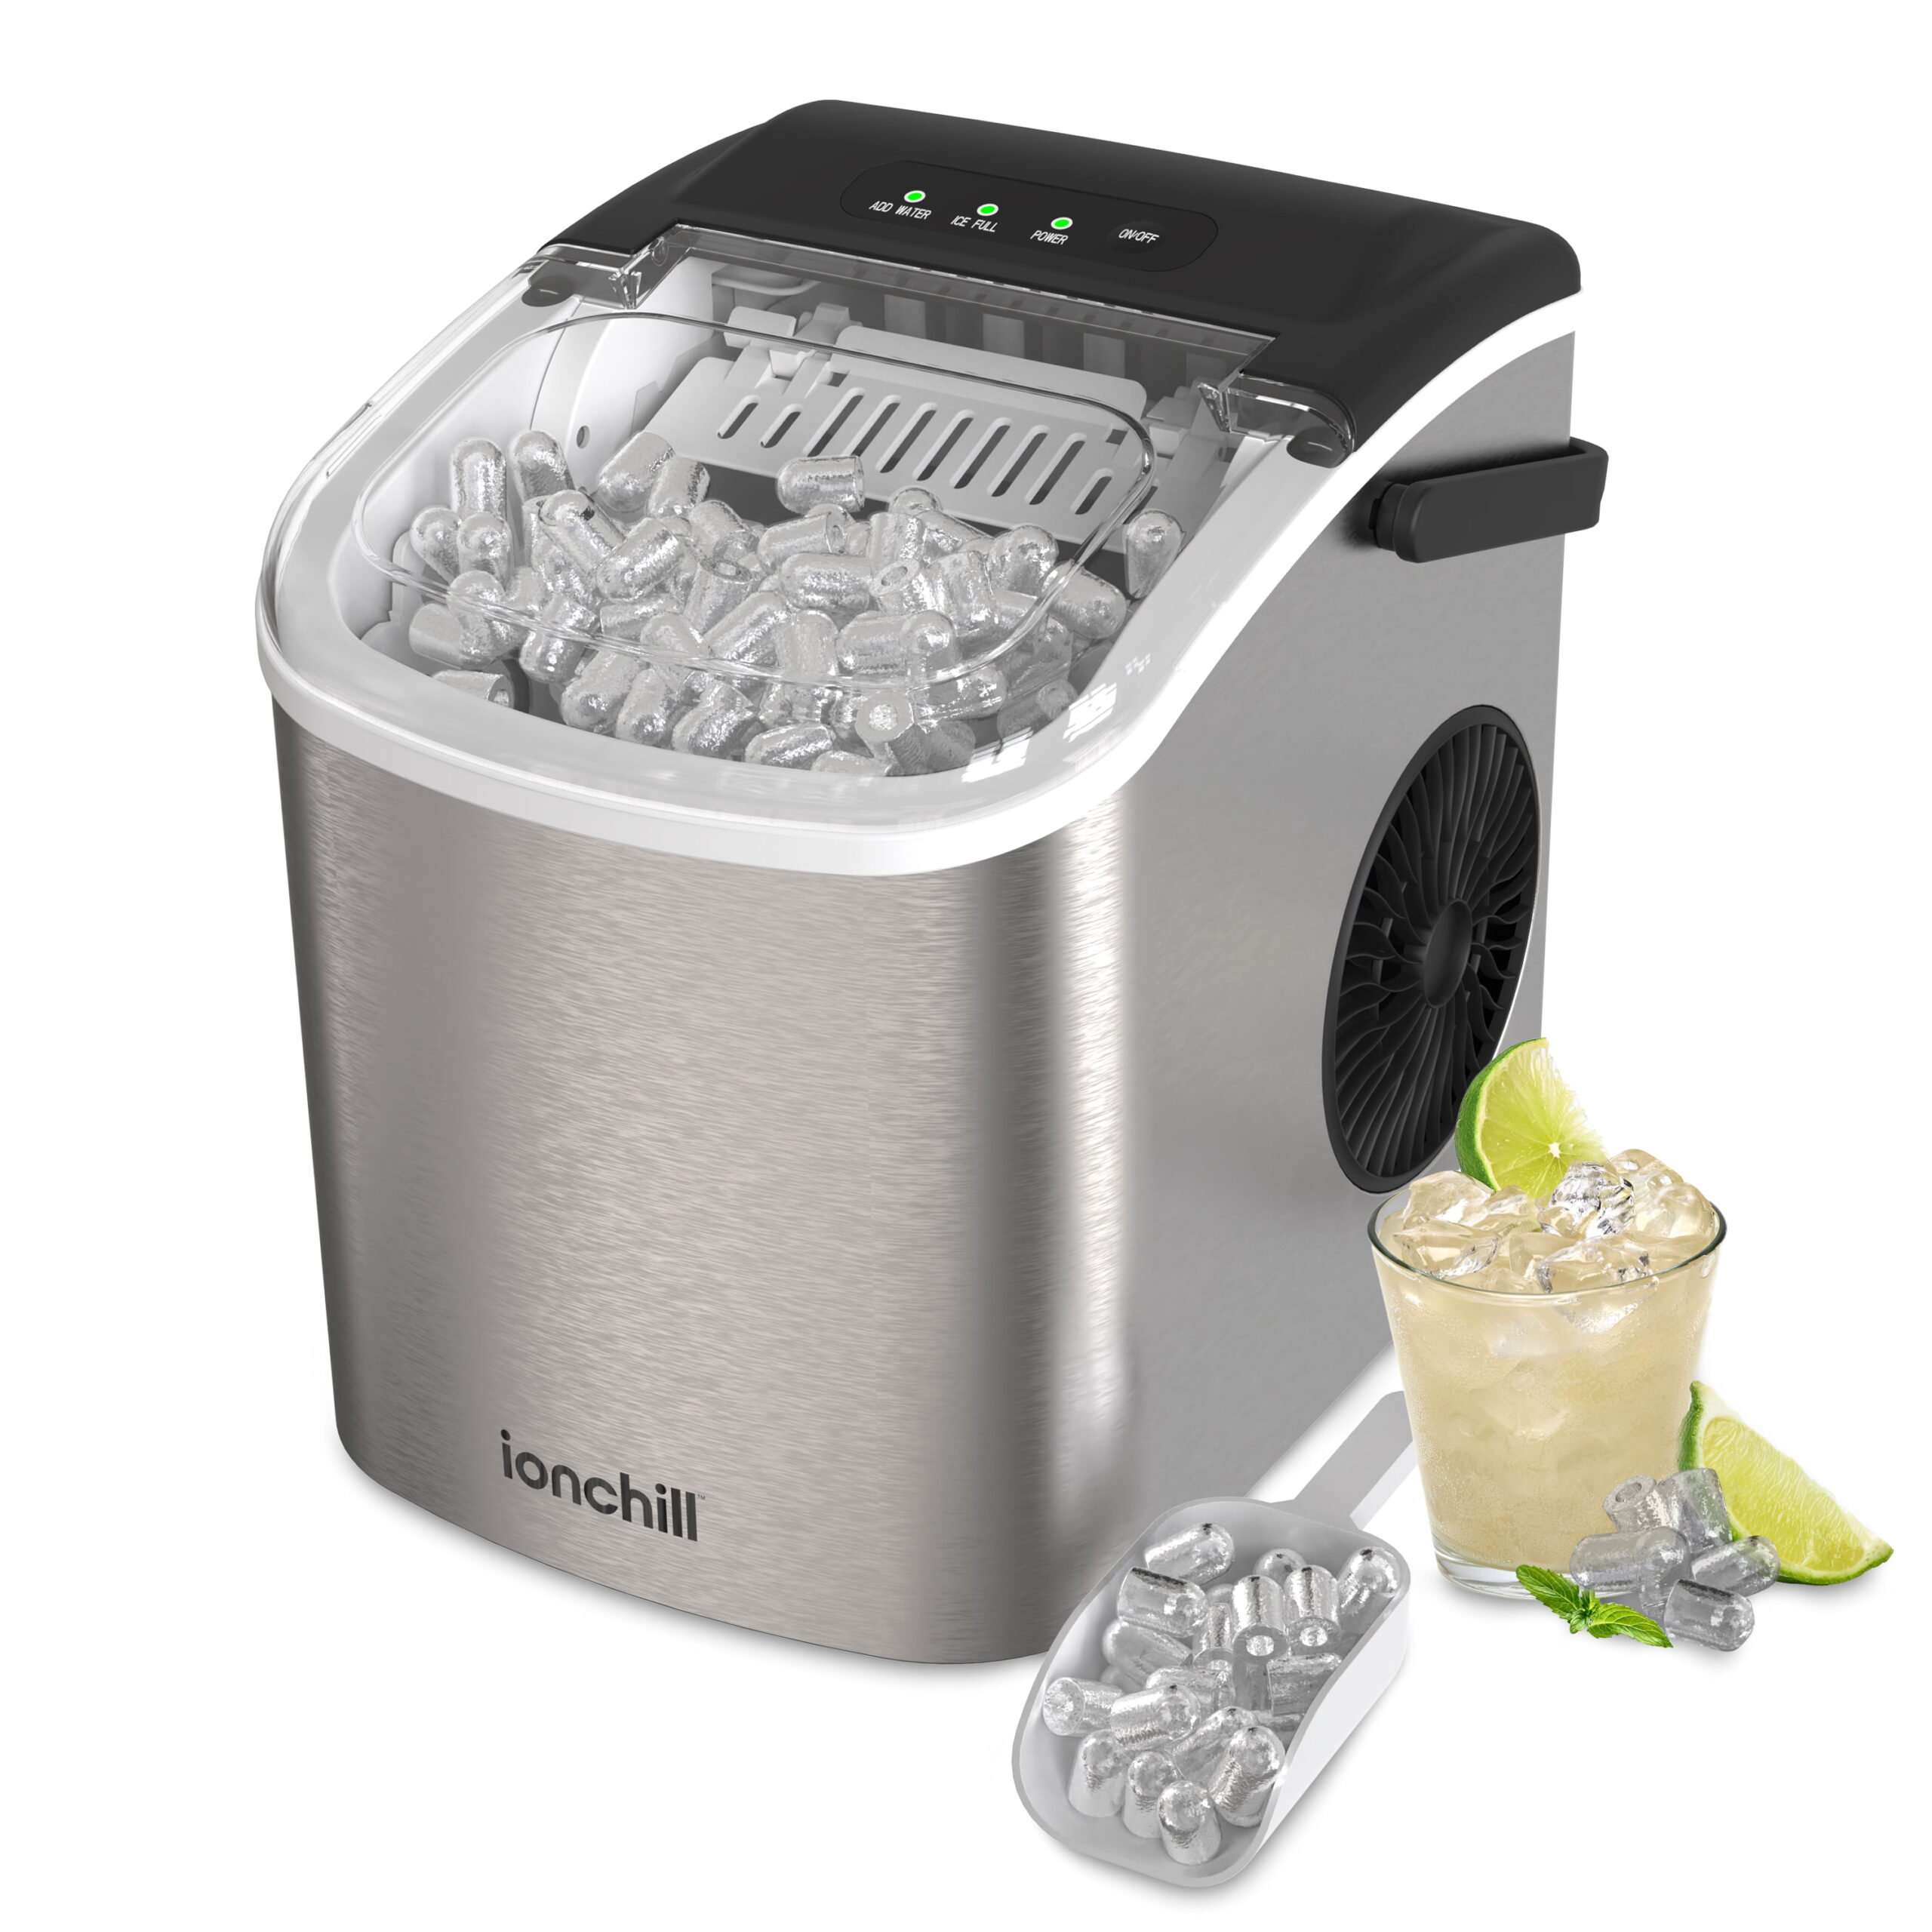 Ionchill Quick Cube Ice Machine, 26lbs/24hrs Portable Countertop